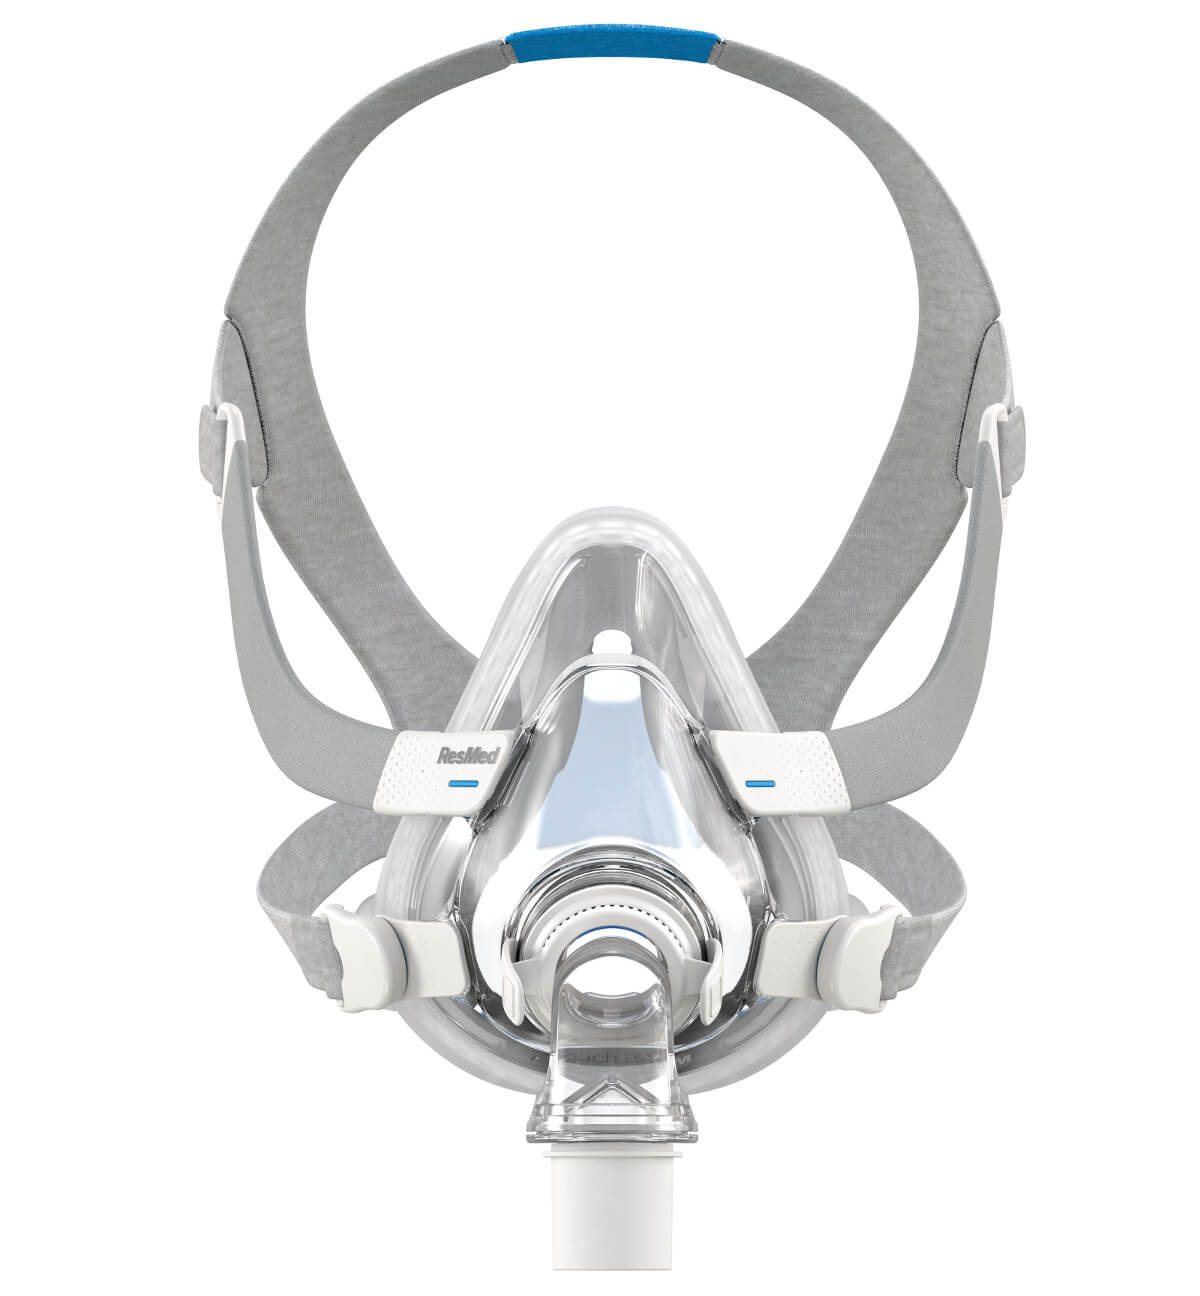 ResMed AirTouch F20 Full Face CPAP Mask